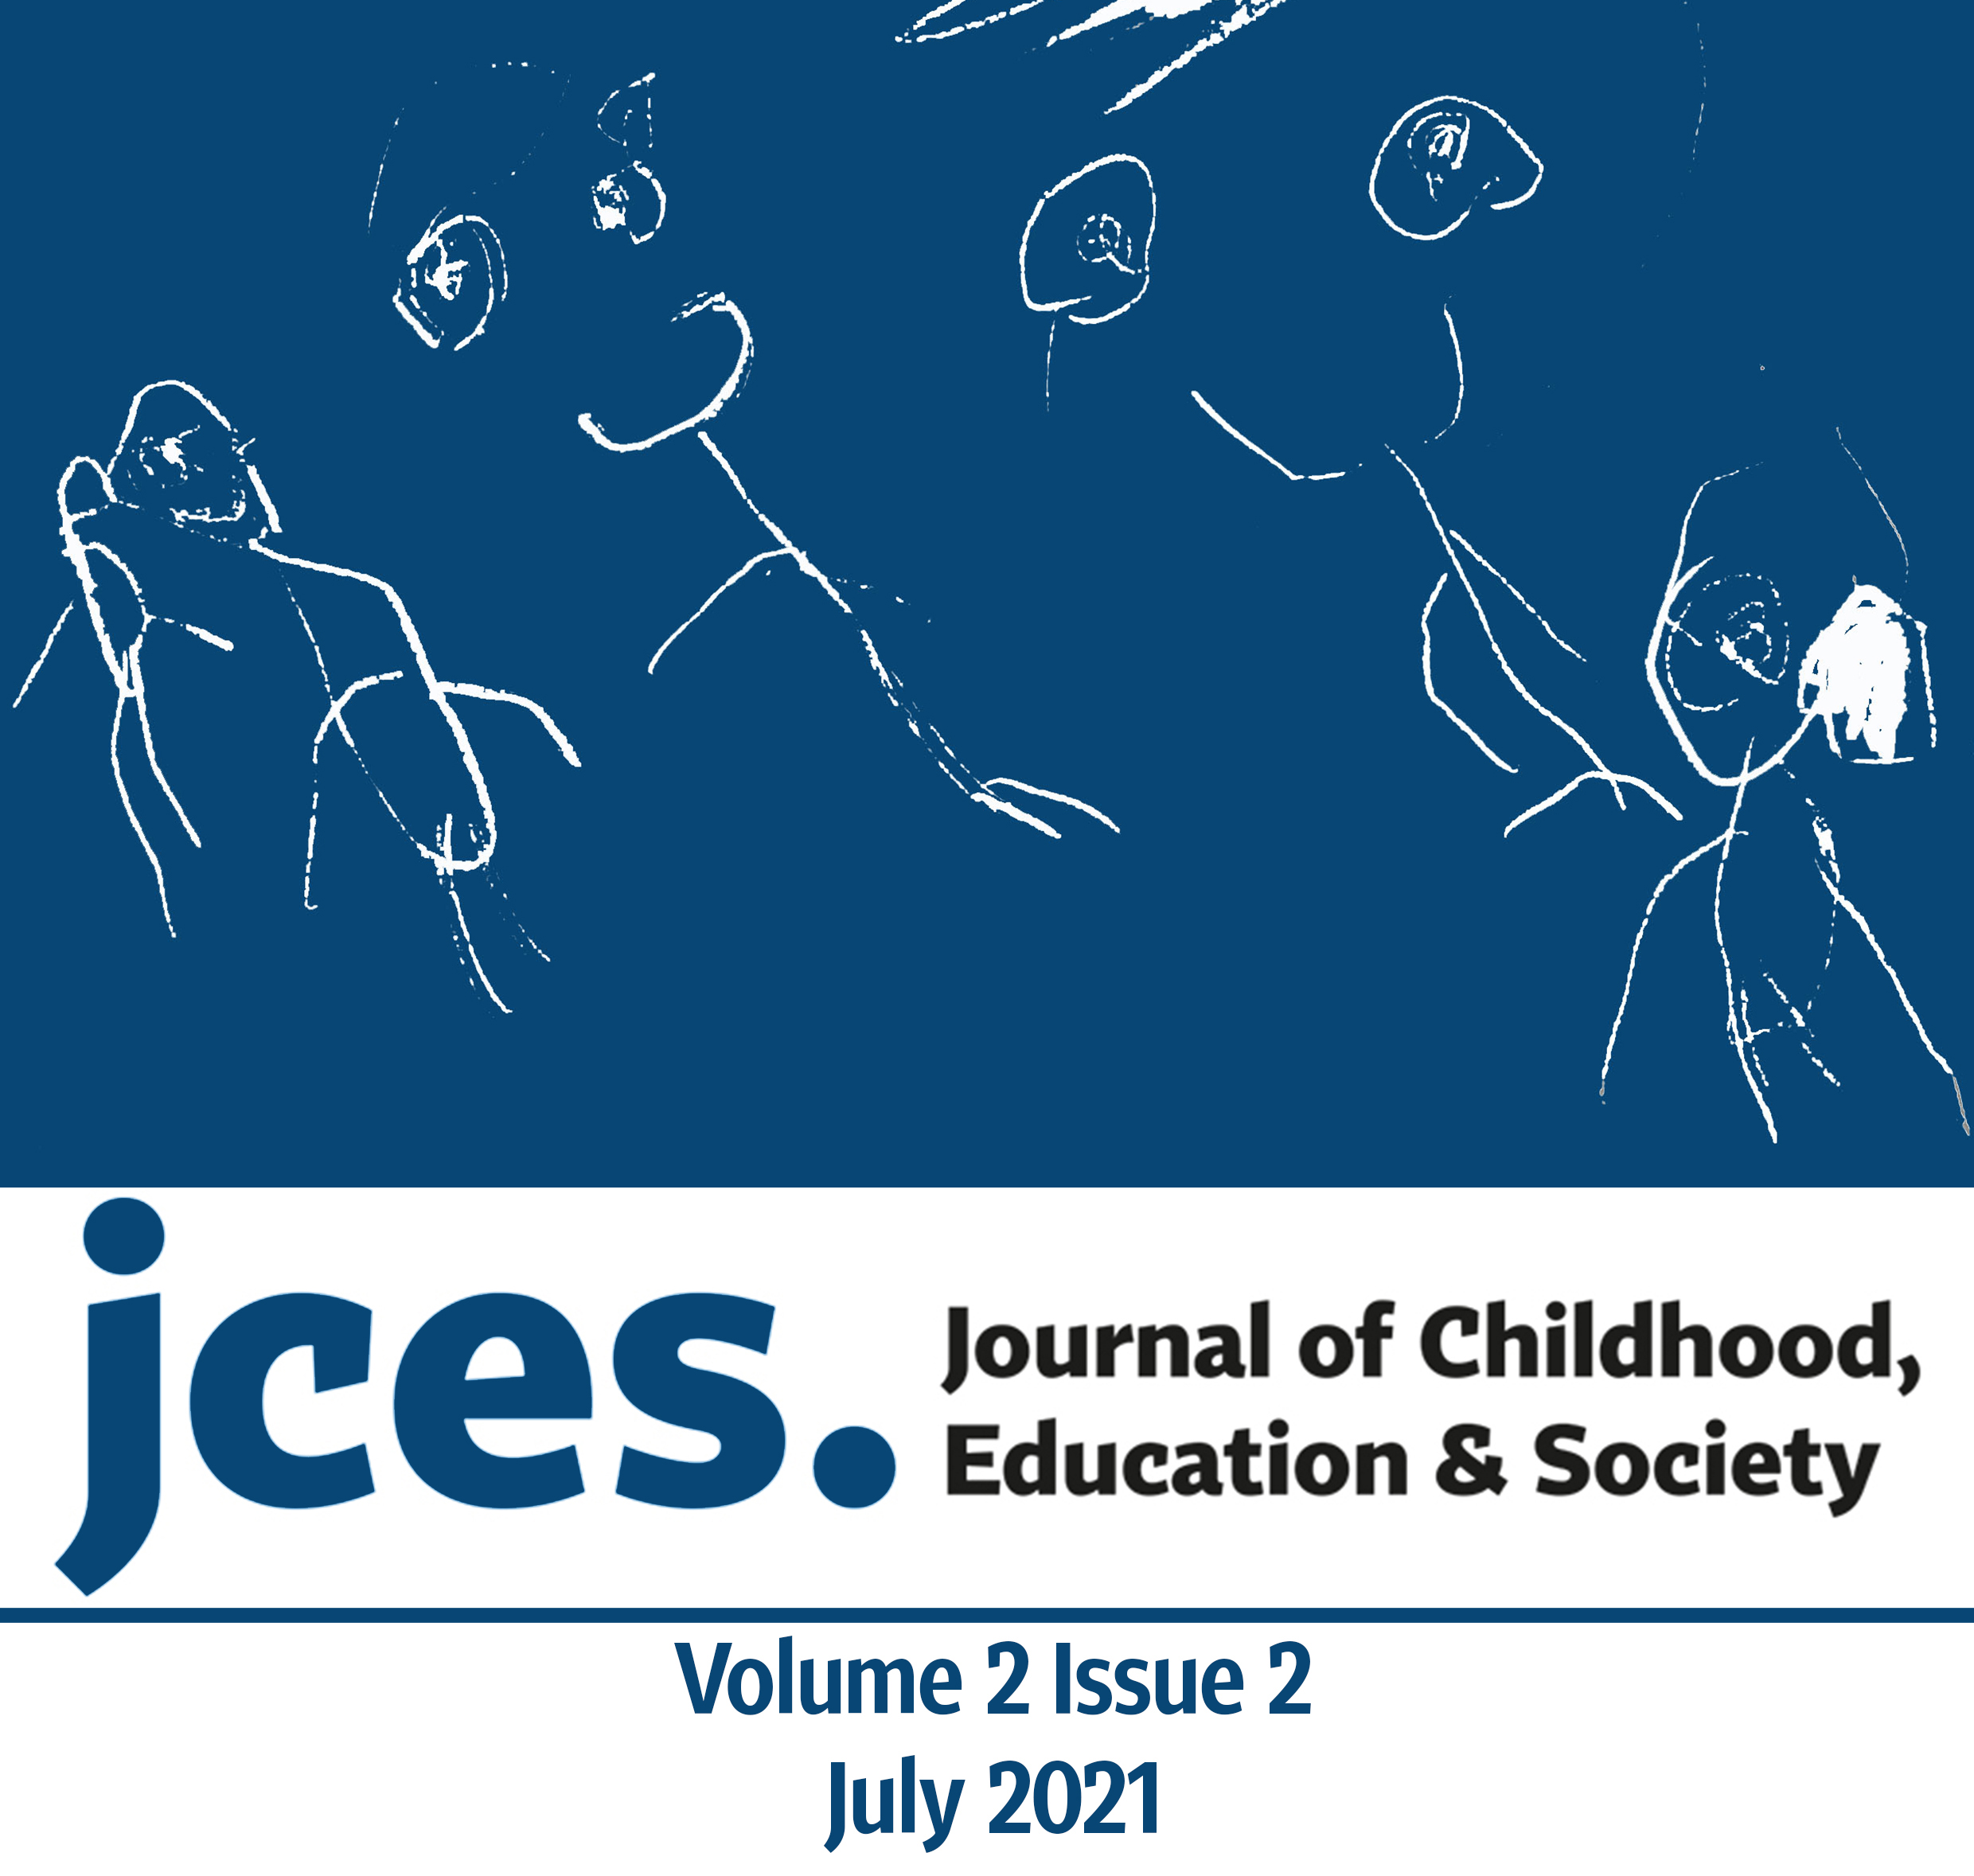 					View Vol. 2 No. 2 (2021): Journal of Childhood, Education & Society
				